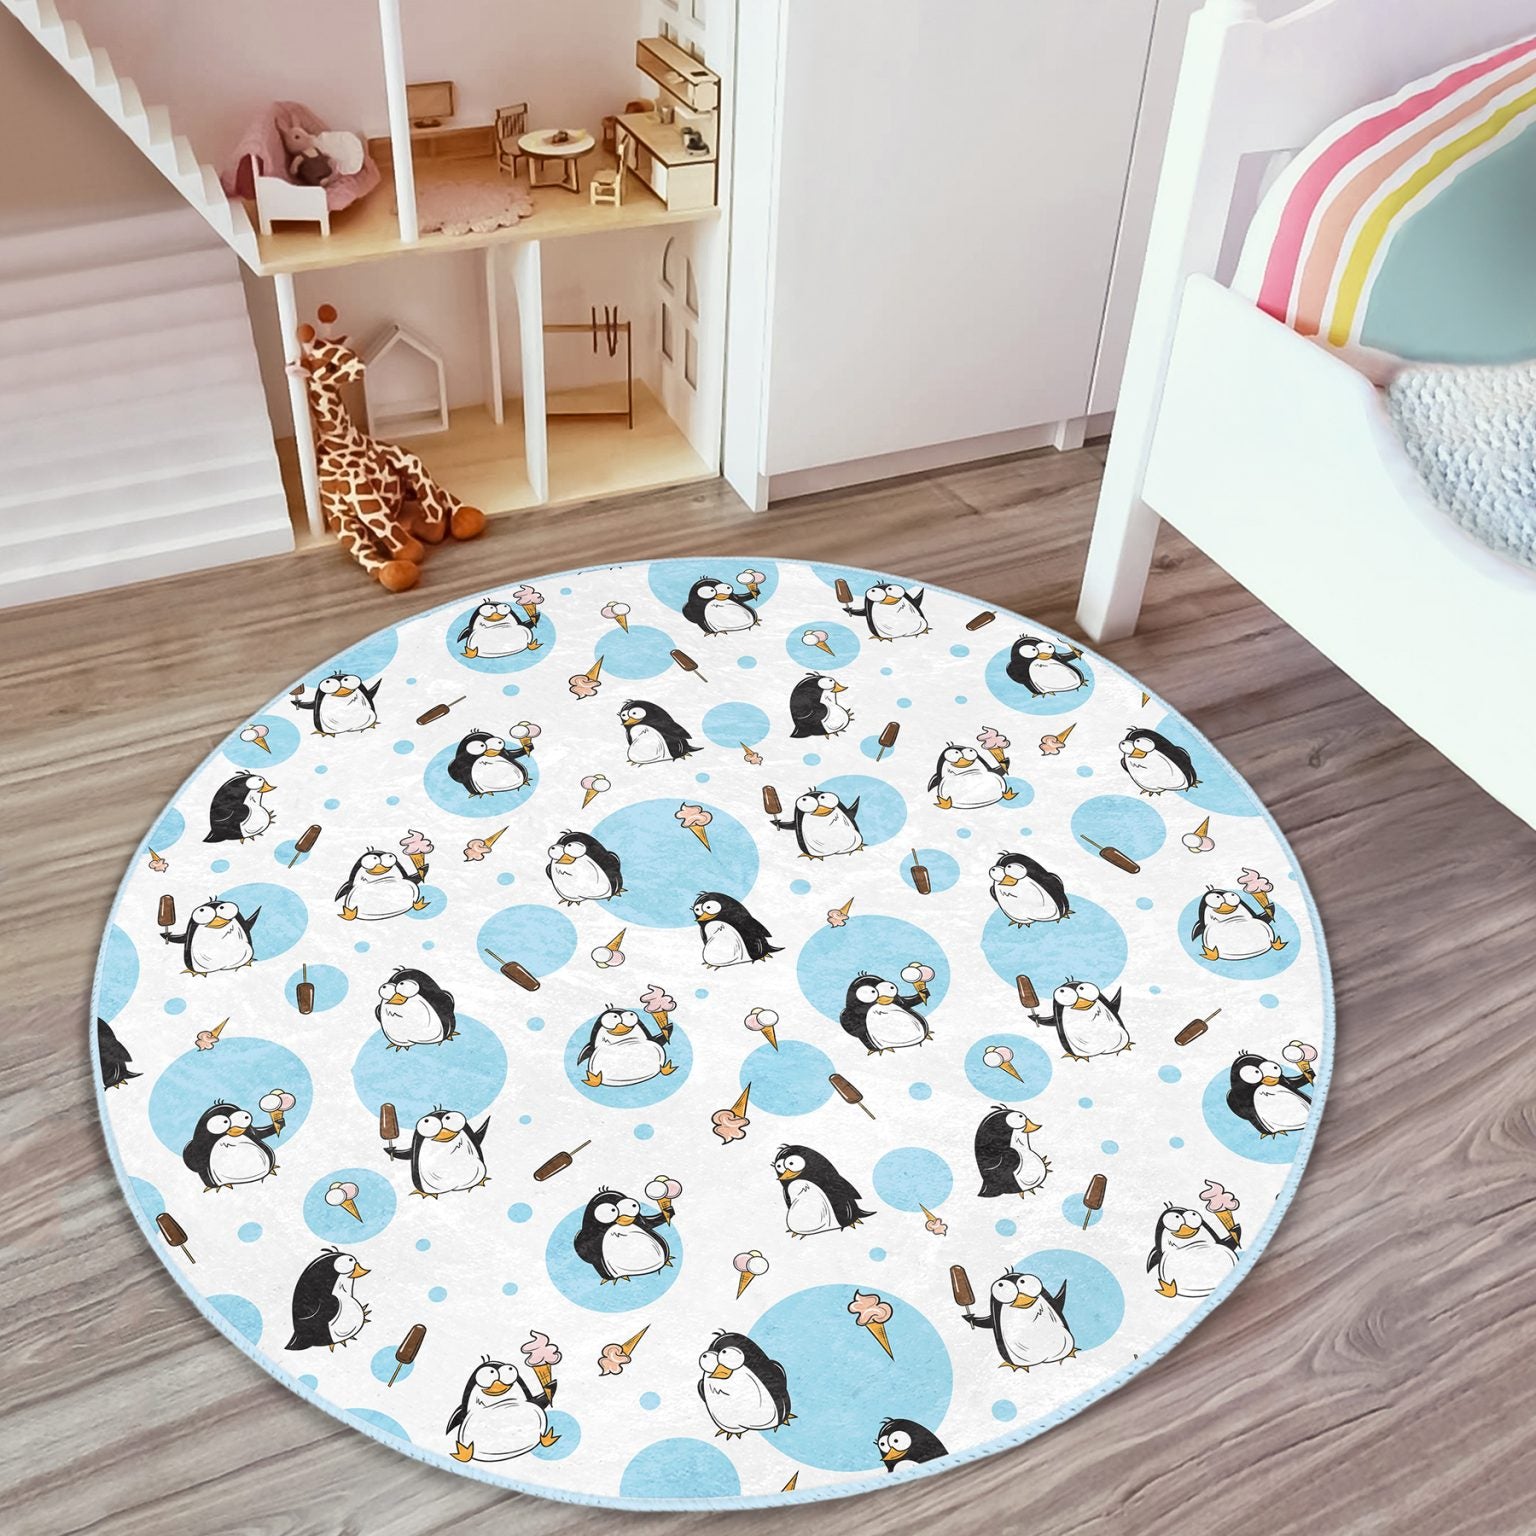 Kid-Friendly Rug with Playful Baby Penguins for Kids' Room